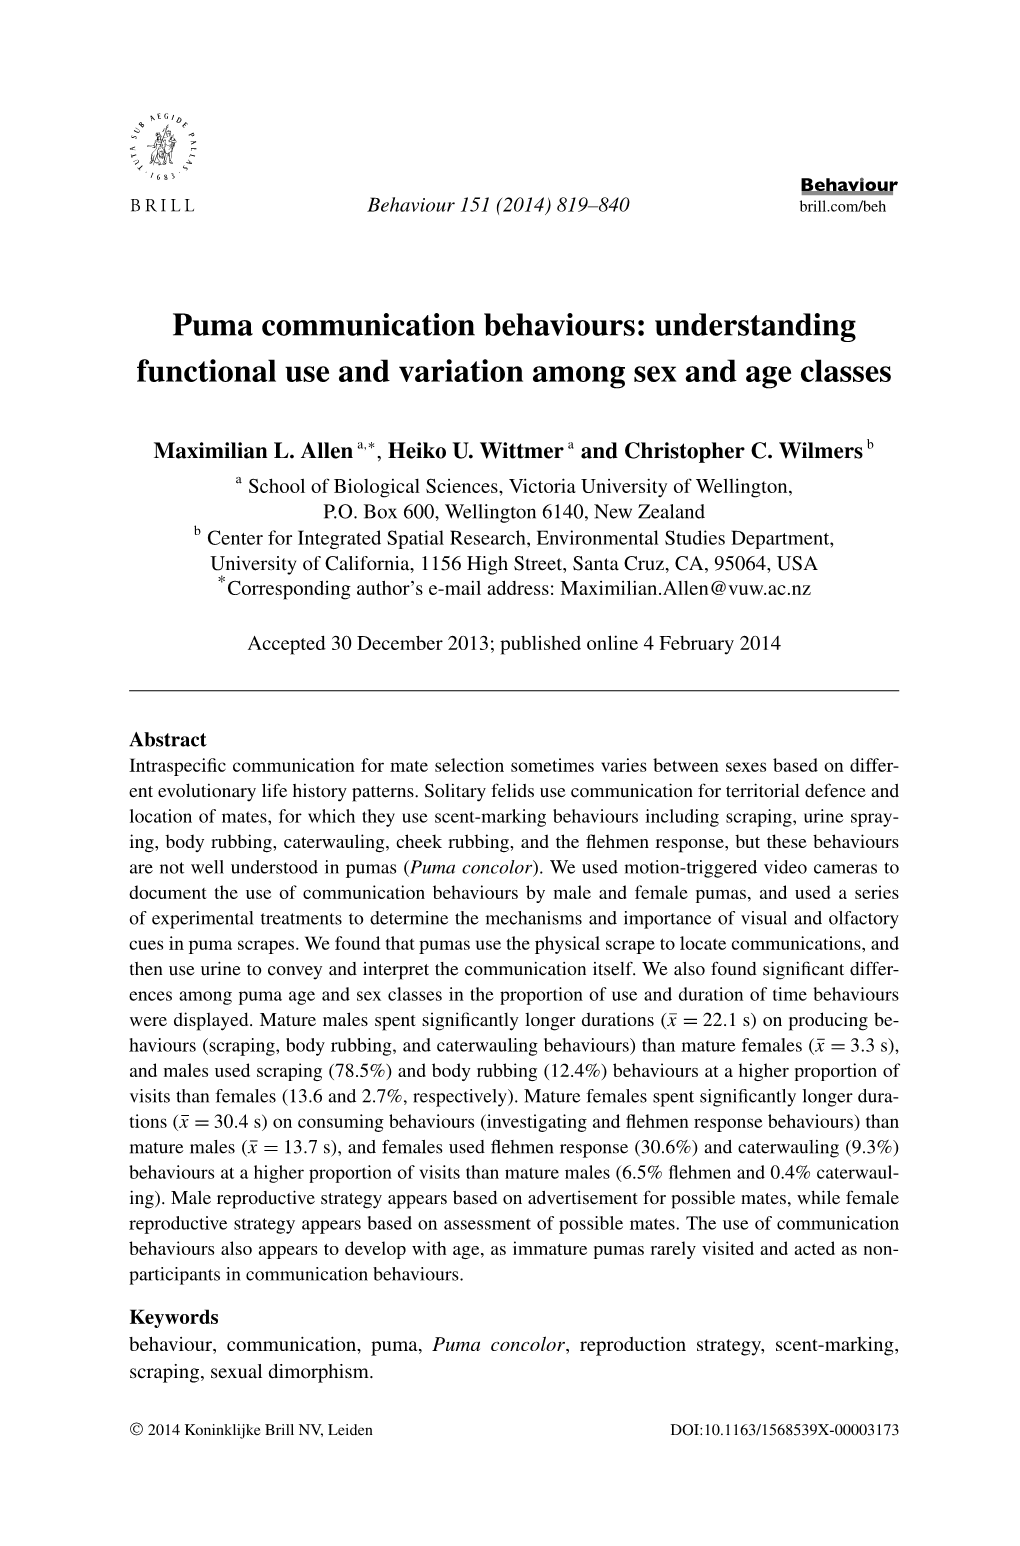 Puma Communication Behaviours: Understanding Functional Use and Variation Among Sex and Age Classes